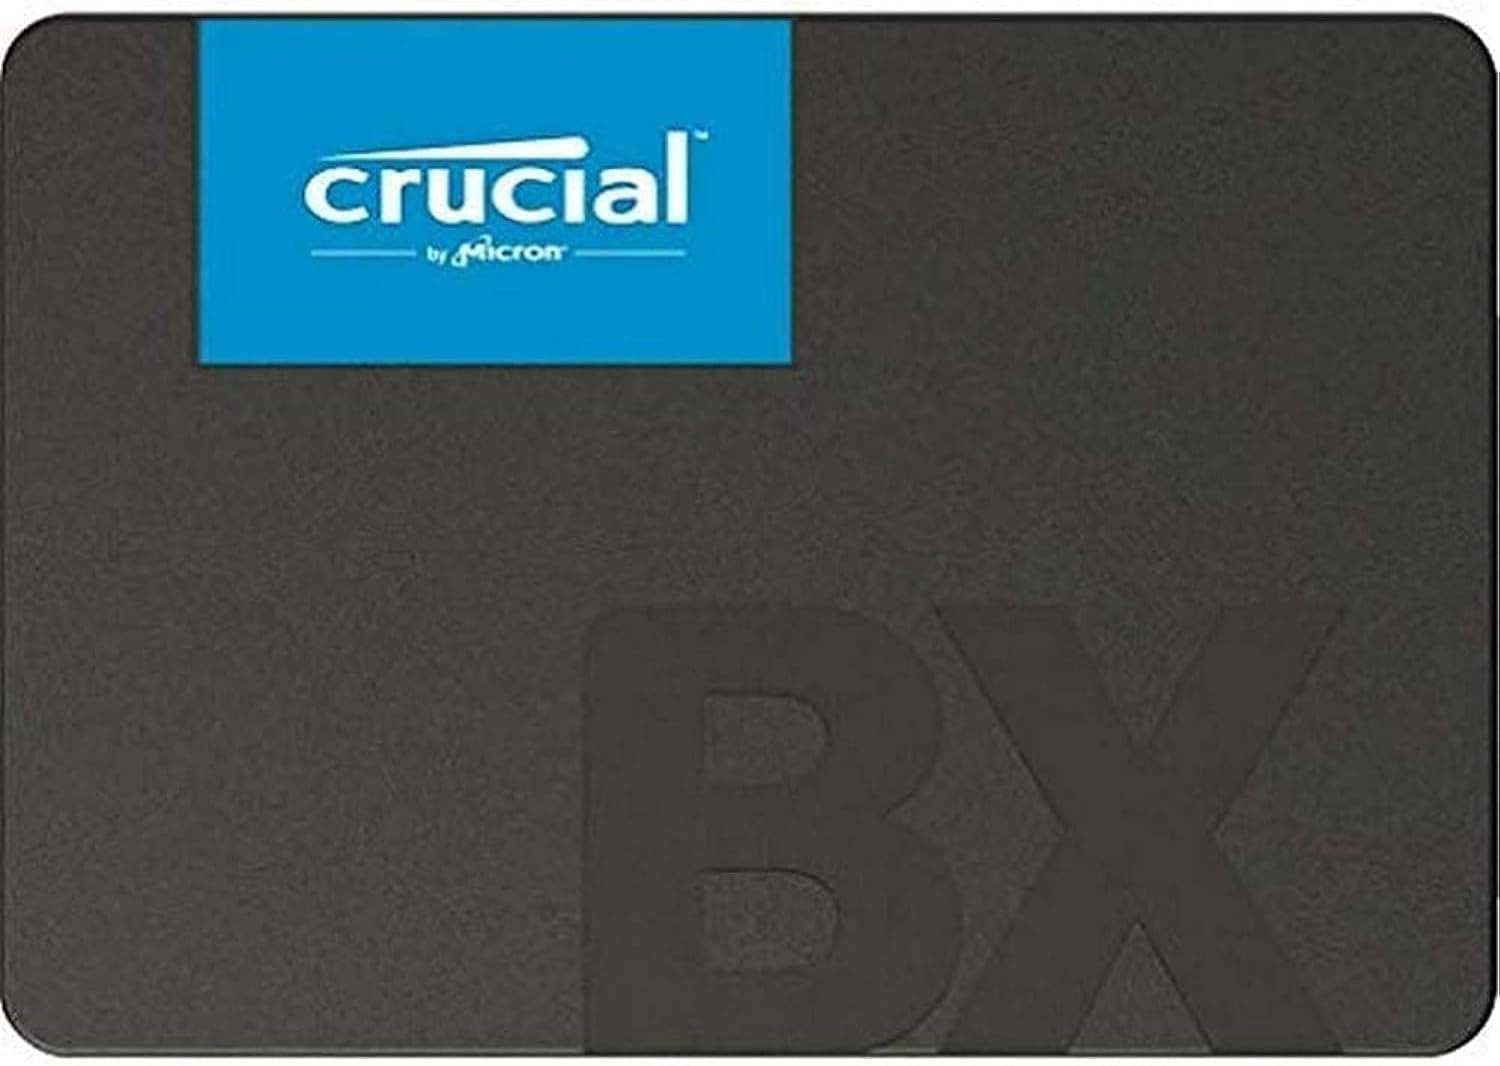 Crucial BX500 240GB 3D NAND SATA 2.5-Inch Internal SSD, up to 540MB/s -